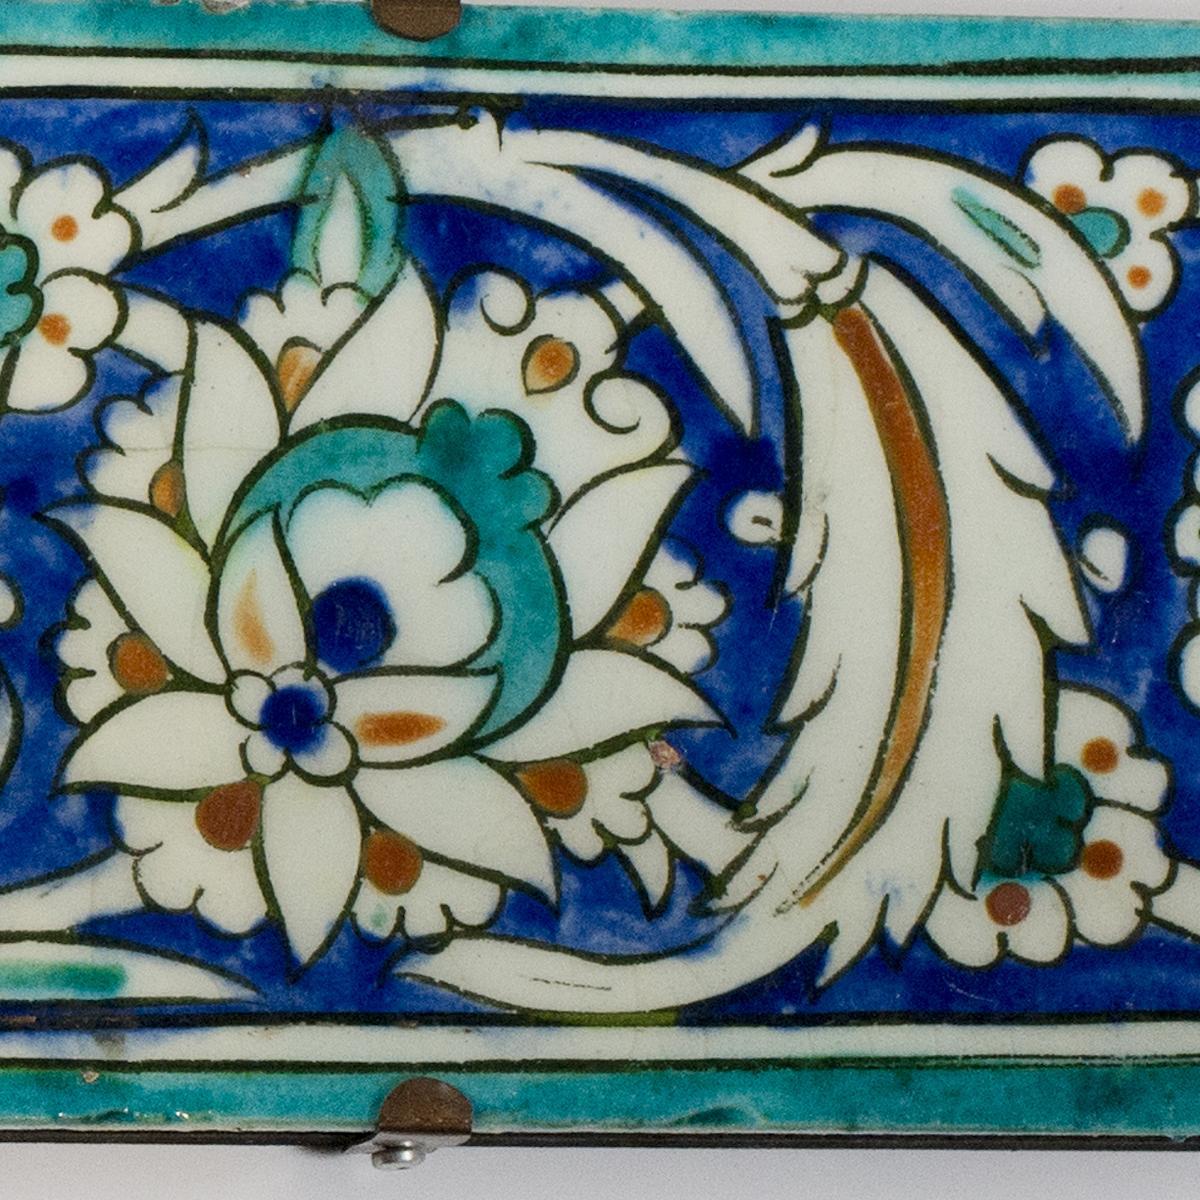 Two ottoman iznik border tiles, circa 1600, each of rectangular form, the glazed fritware painted in underglaze turquoise, cobalt blue, black and terracotta red with a continuous band of leafy arabesque scrolls enclosing flowerheads, with turquoise